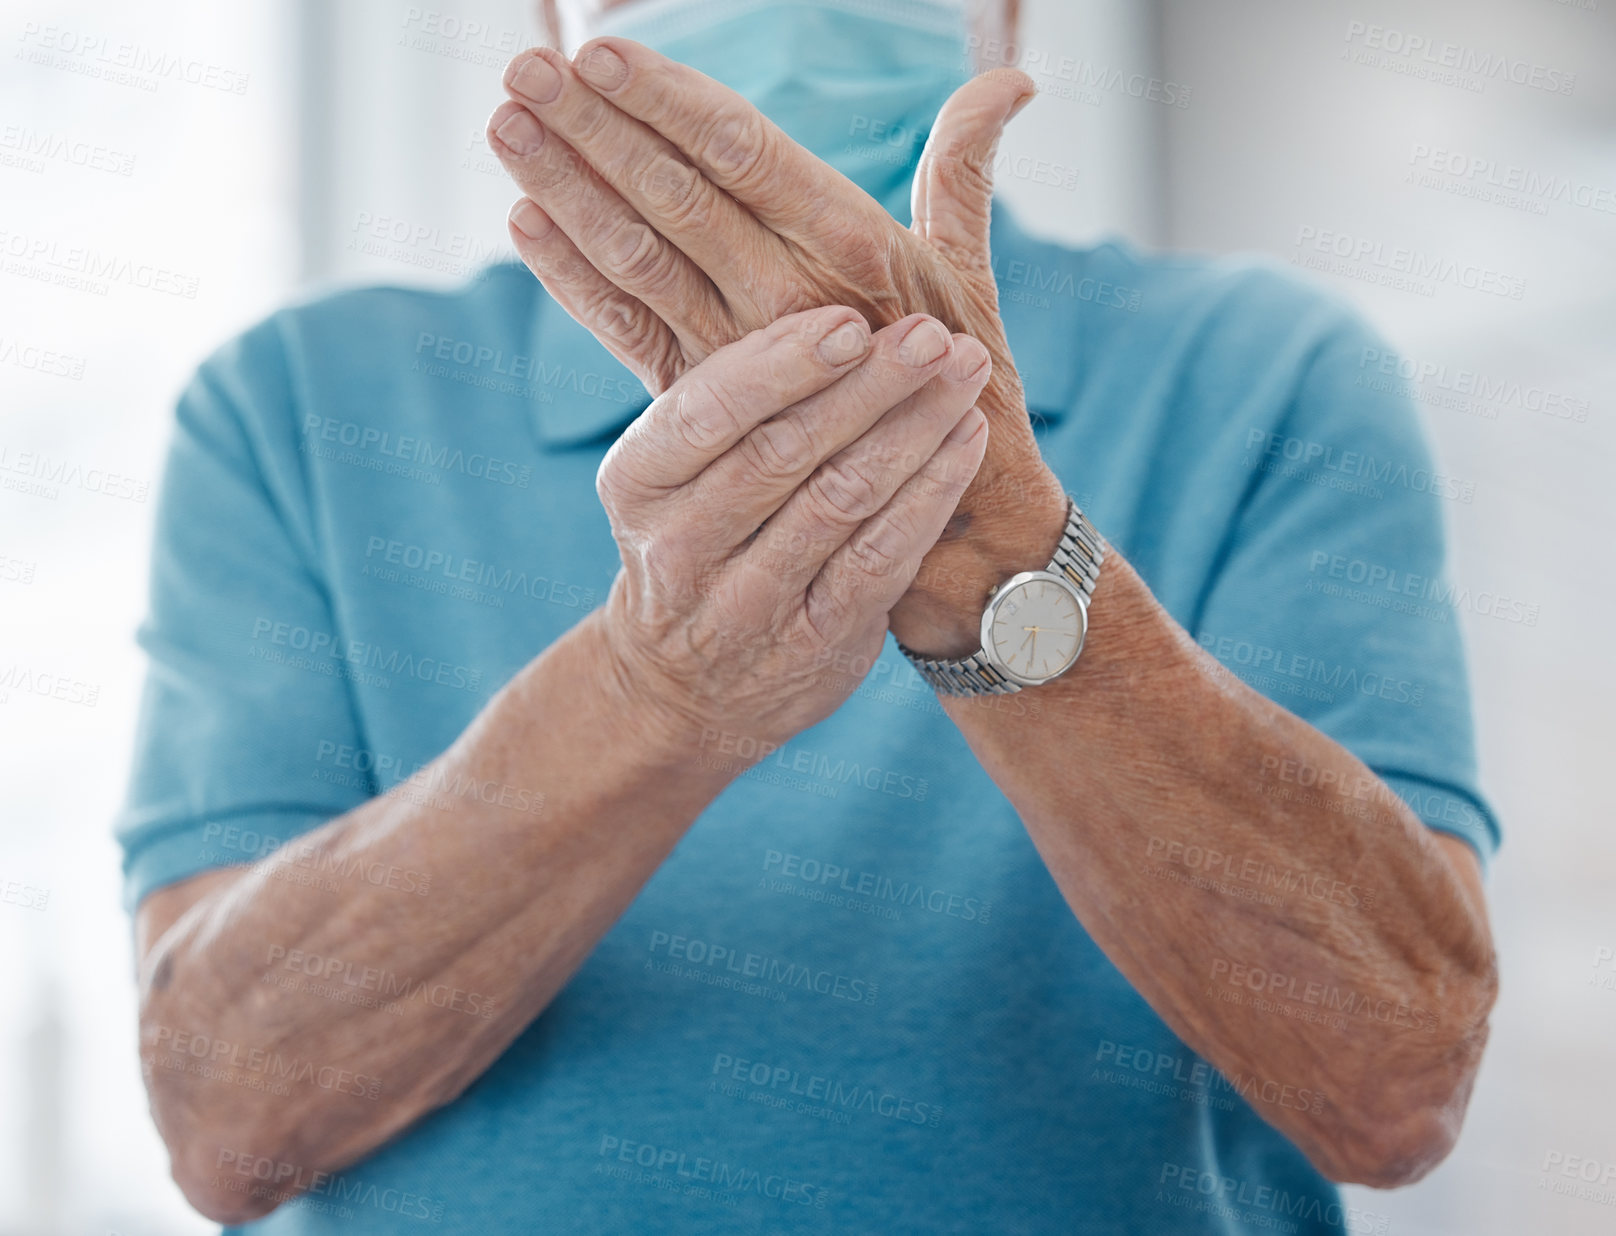 Buy stock photo Shot of an unrecognizable man feeling his hands in a hospital